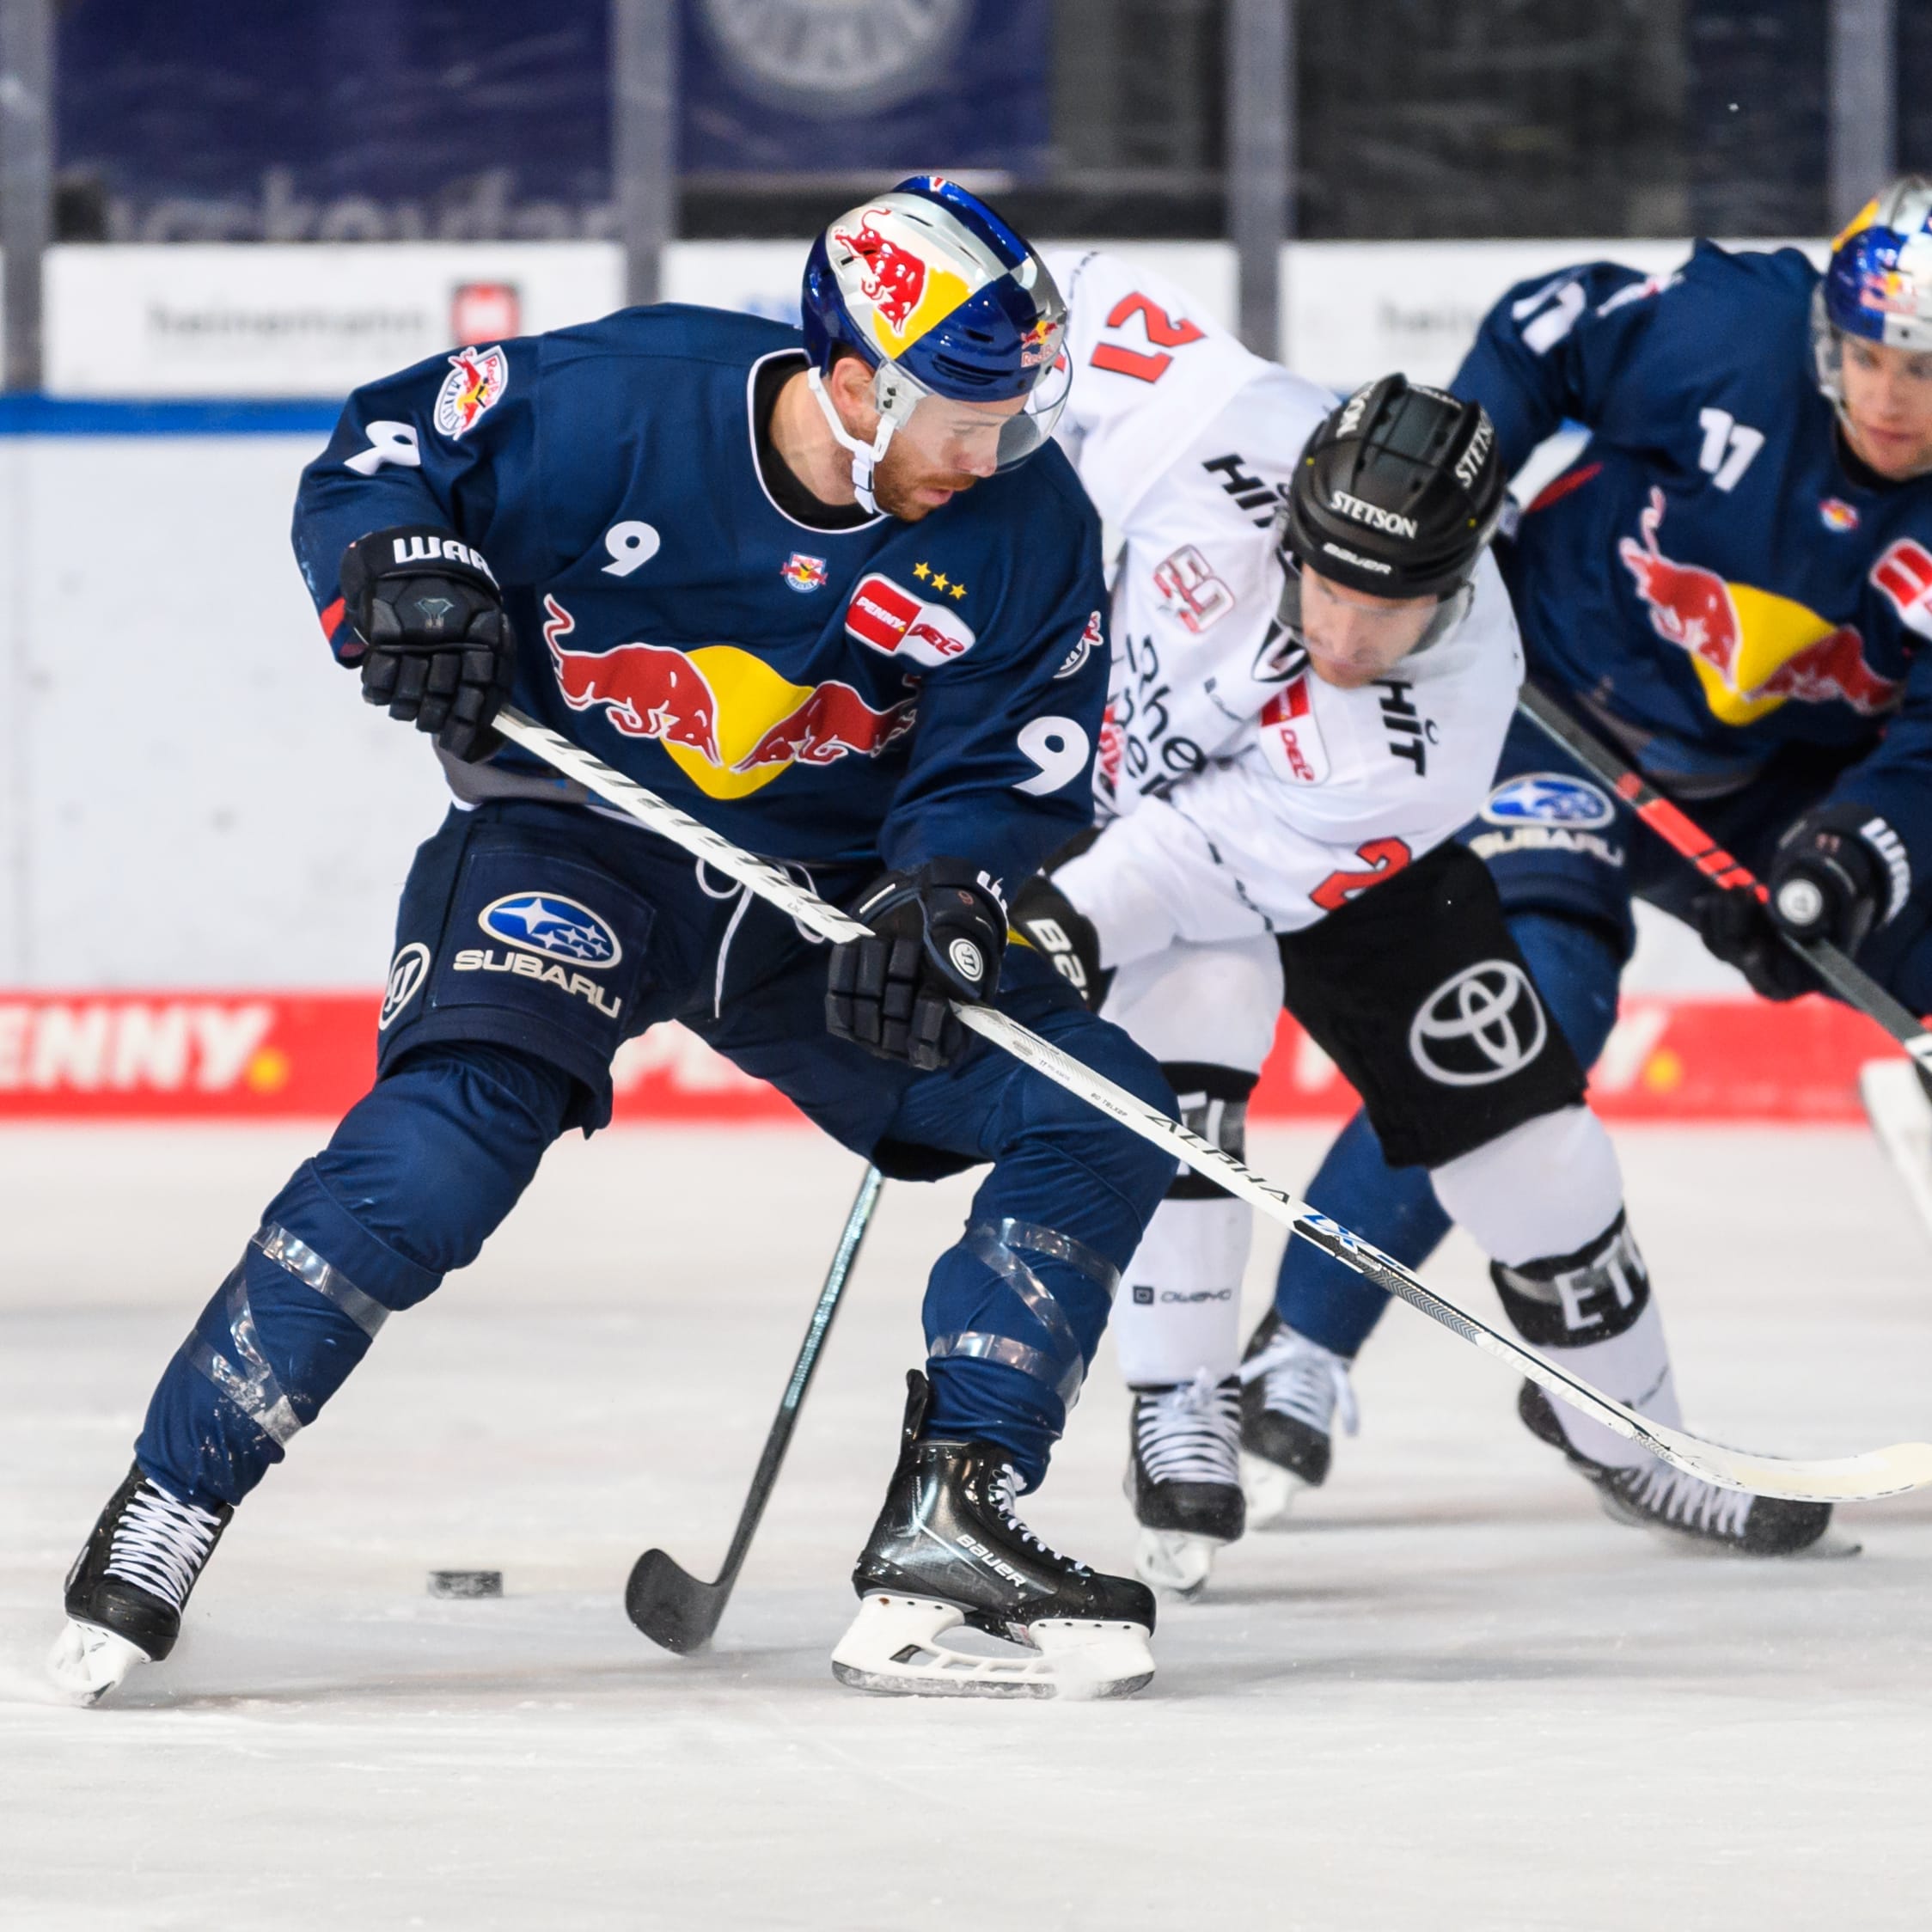 DEL EHC Red Bull München loses to Kölner Haie despite strong final phase